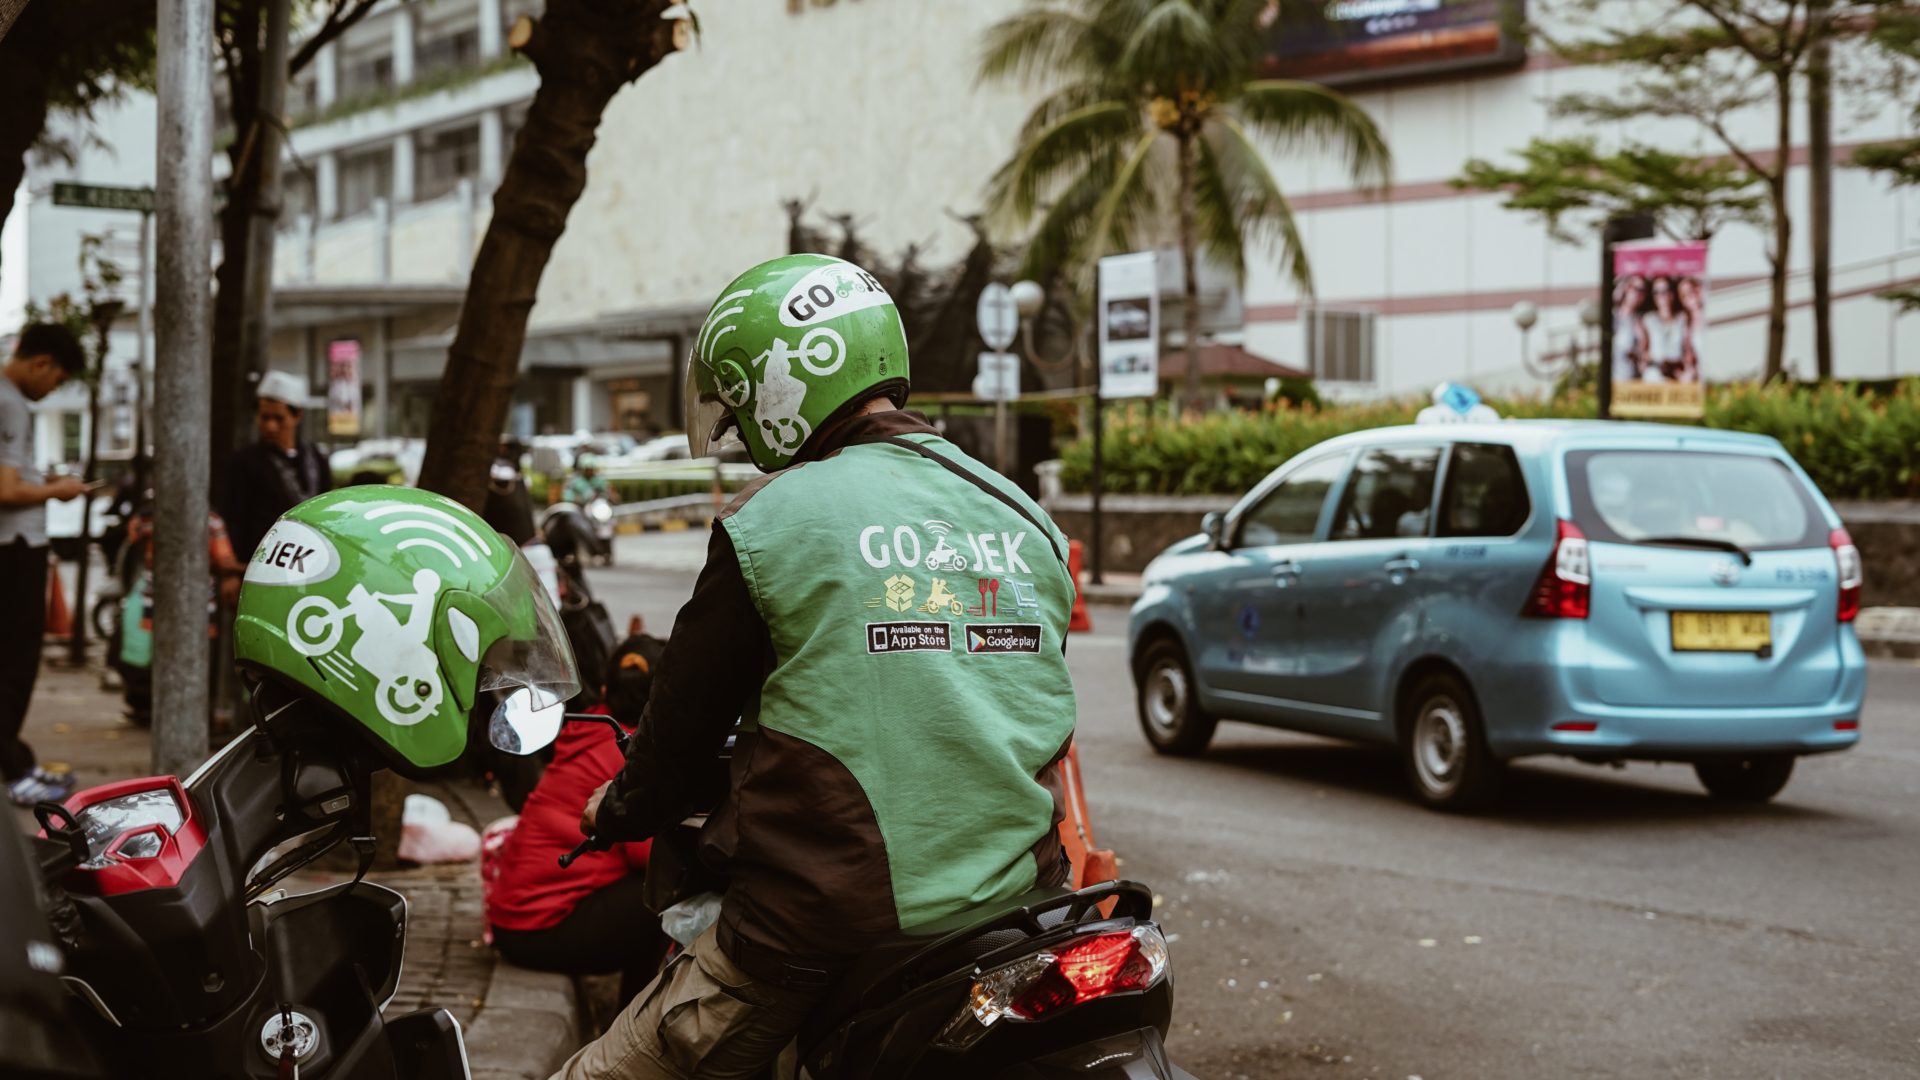 Gojek – Indonesia’s ride-hailing giant – takes up a fight in the streaming market